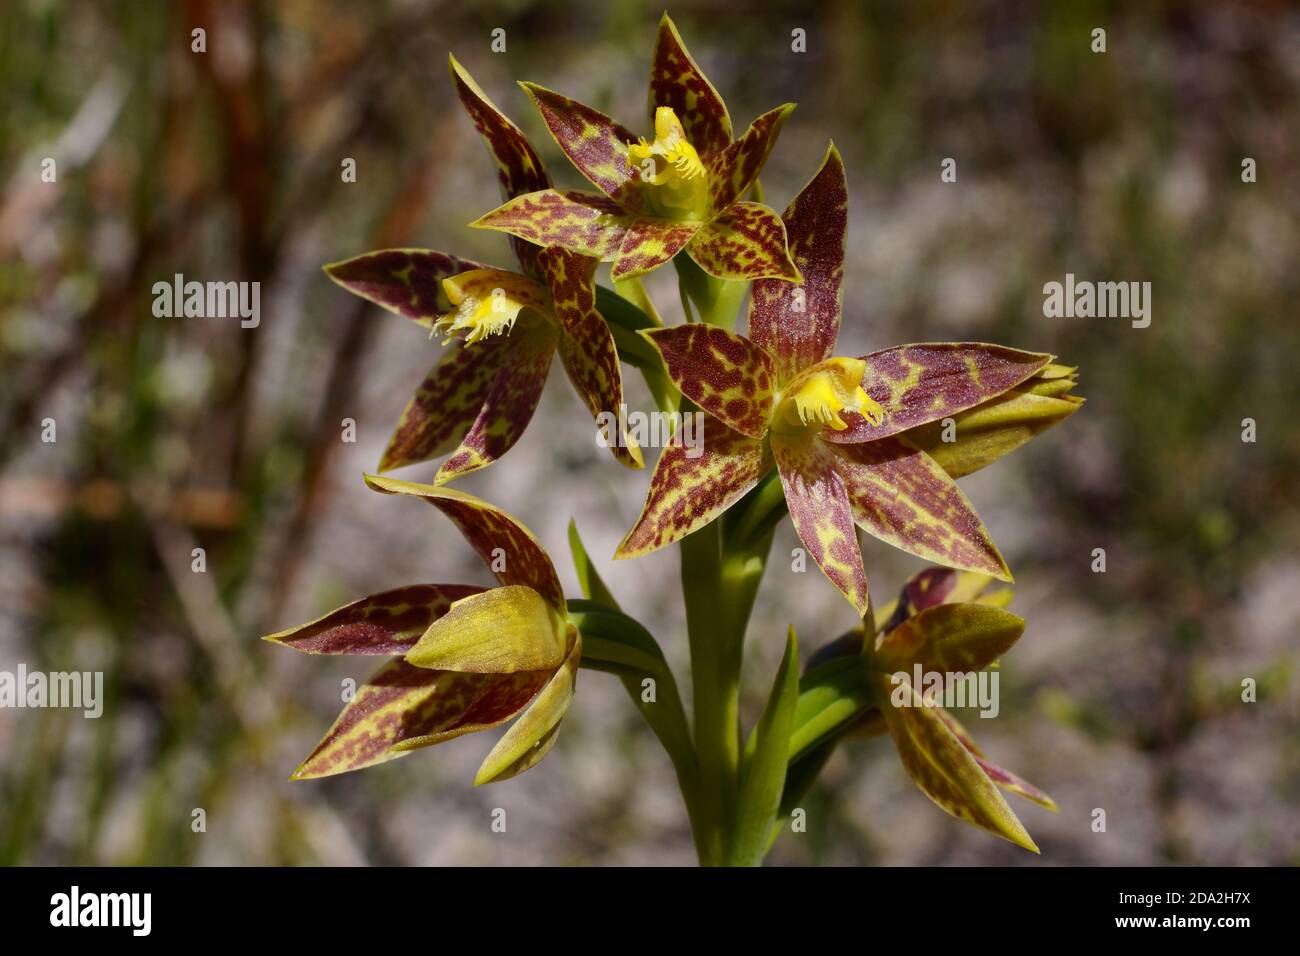 Brown and yellow flowers of Thelymitra benthamiana, Leopard orchid, endemic to Australia, near Esperance, Western Australia Stock Photo